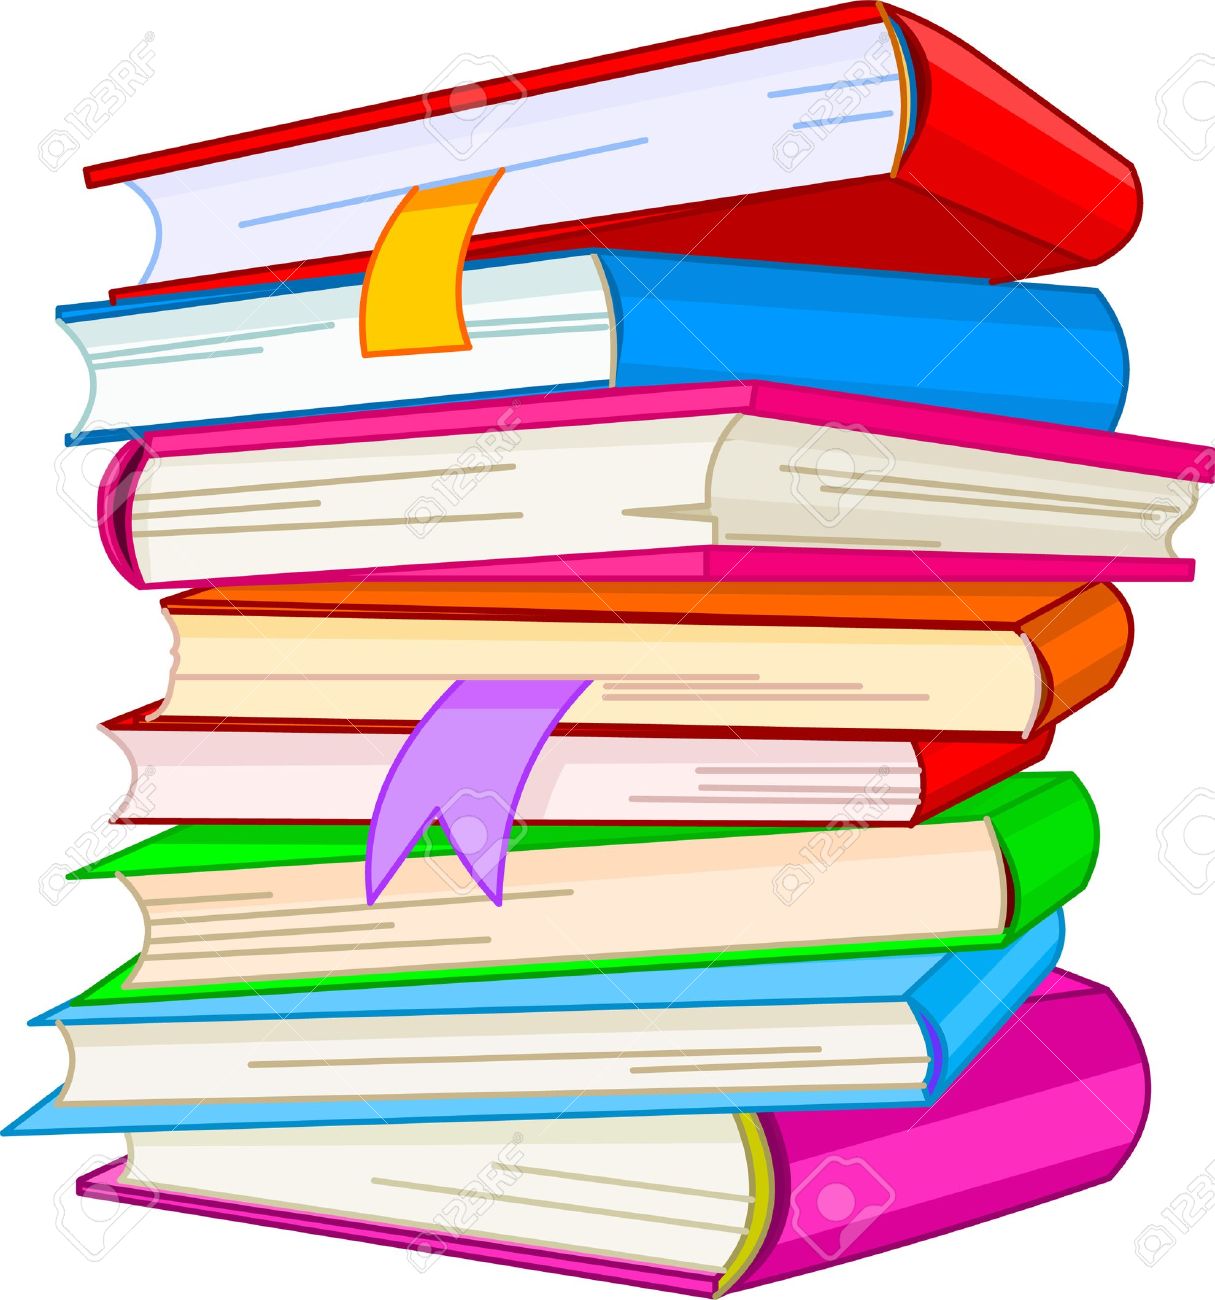 Books clipart background